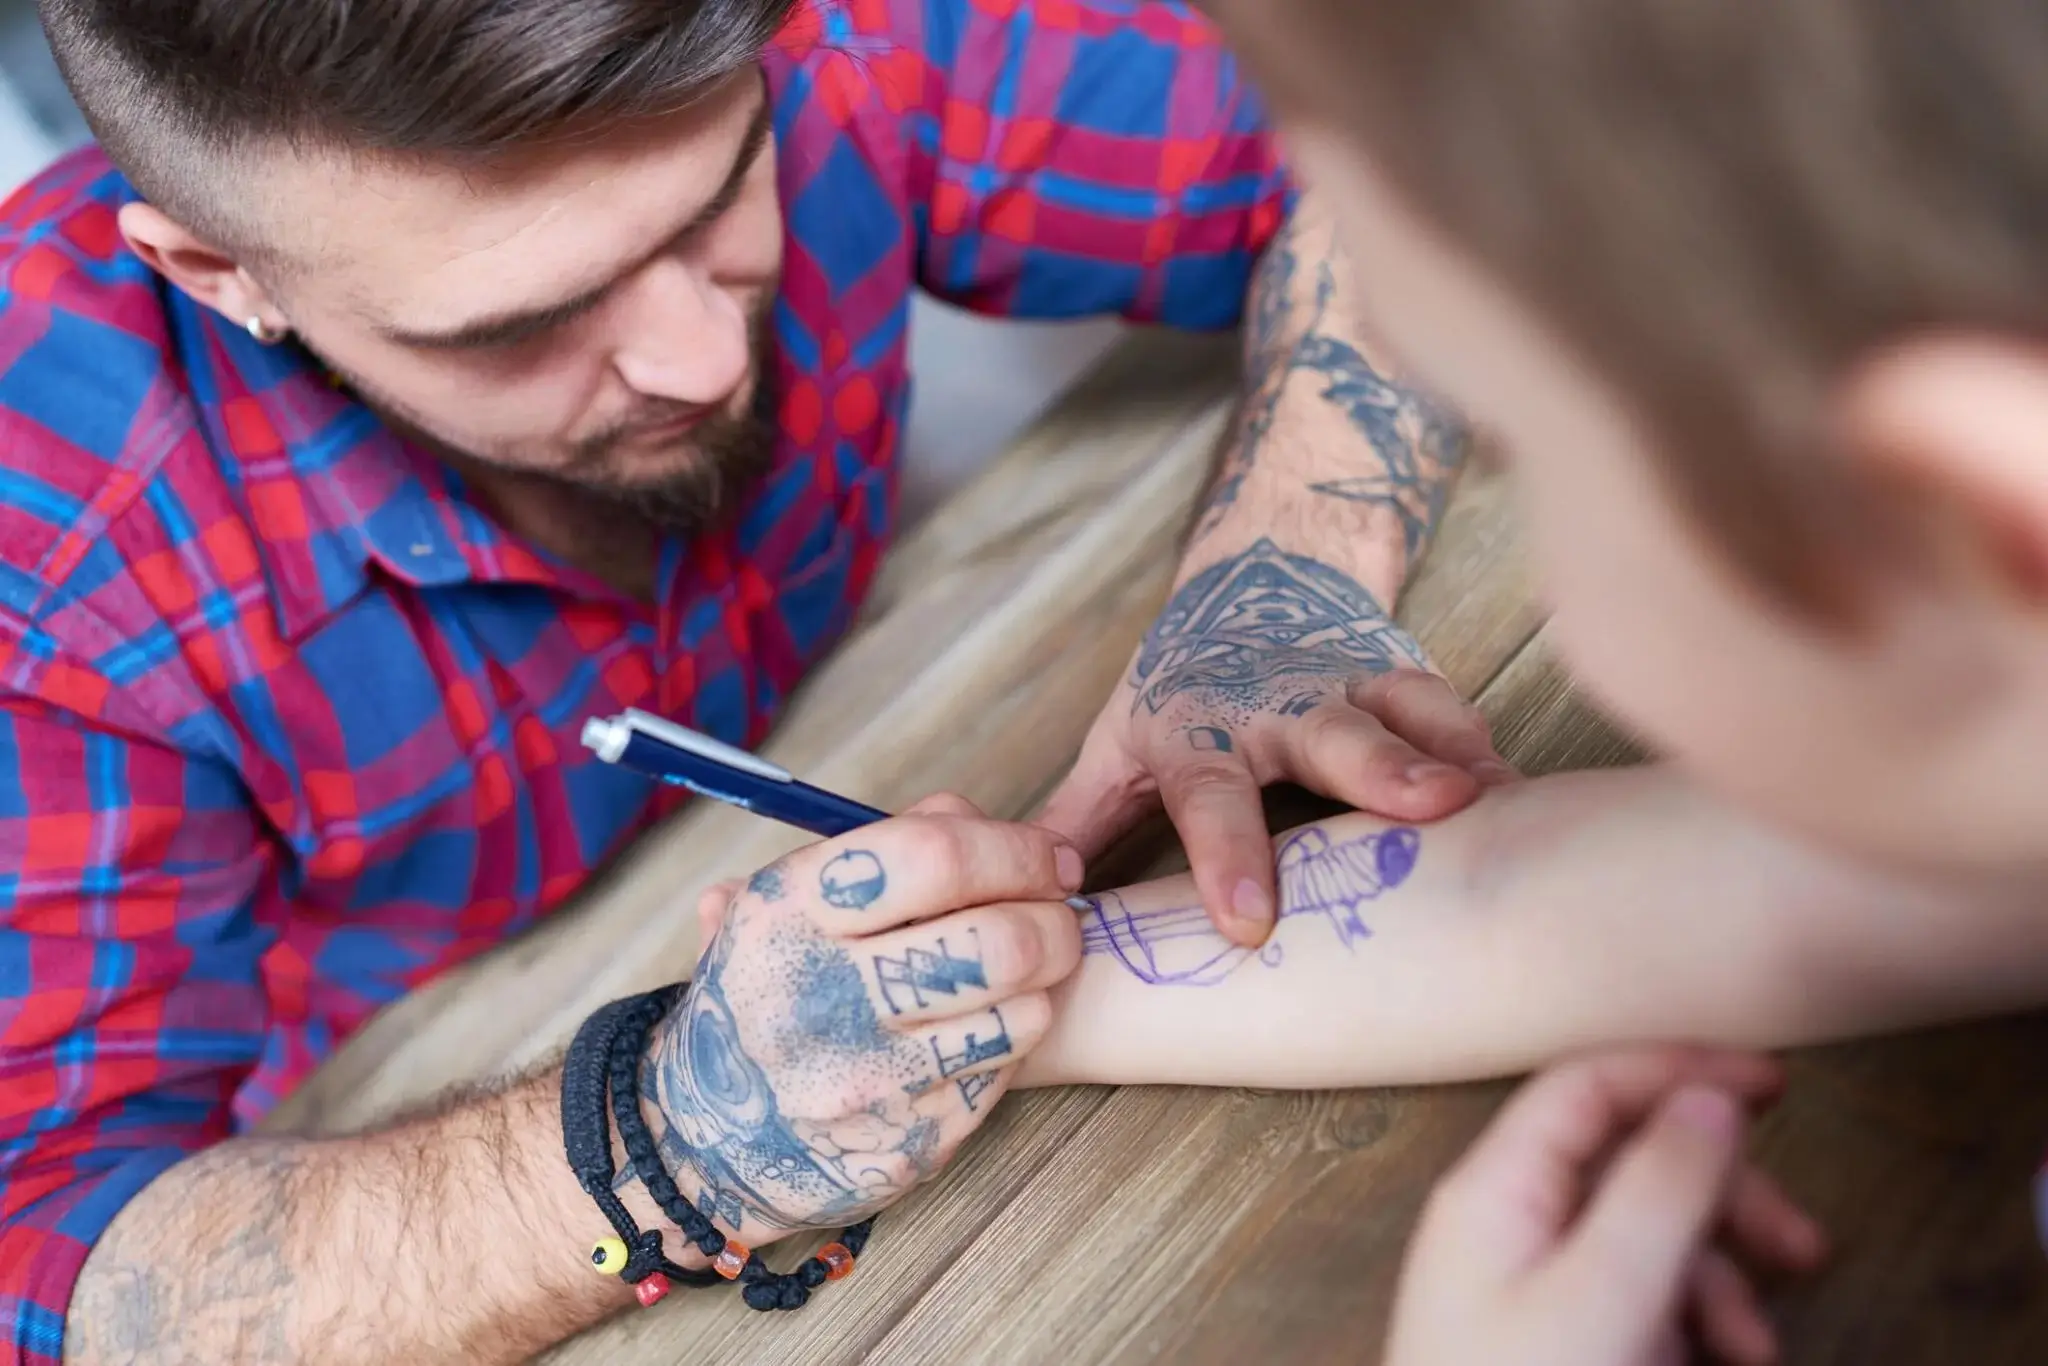 How To Prevent Tattoos From Fading